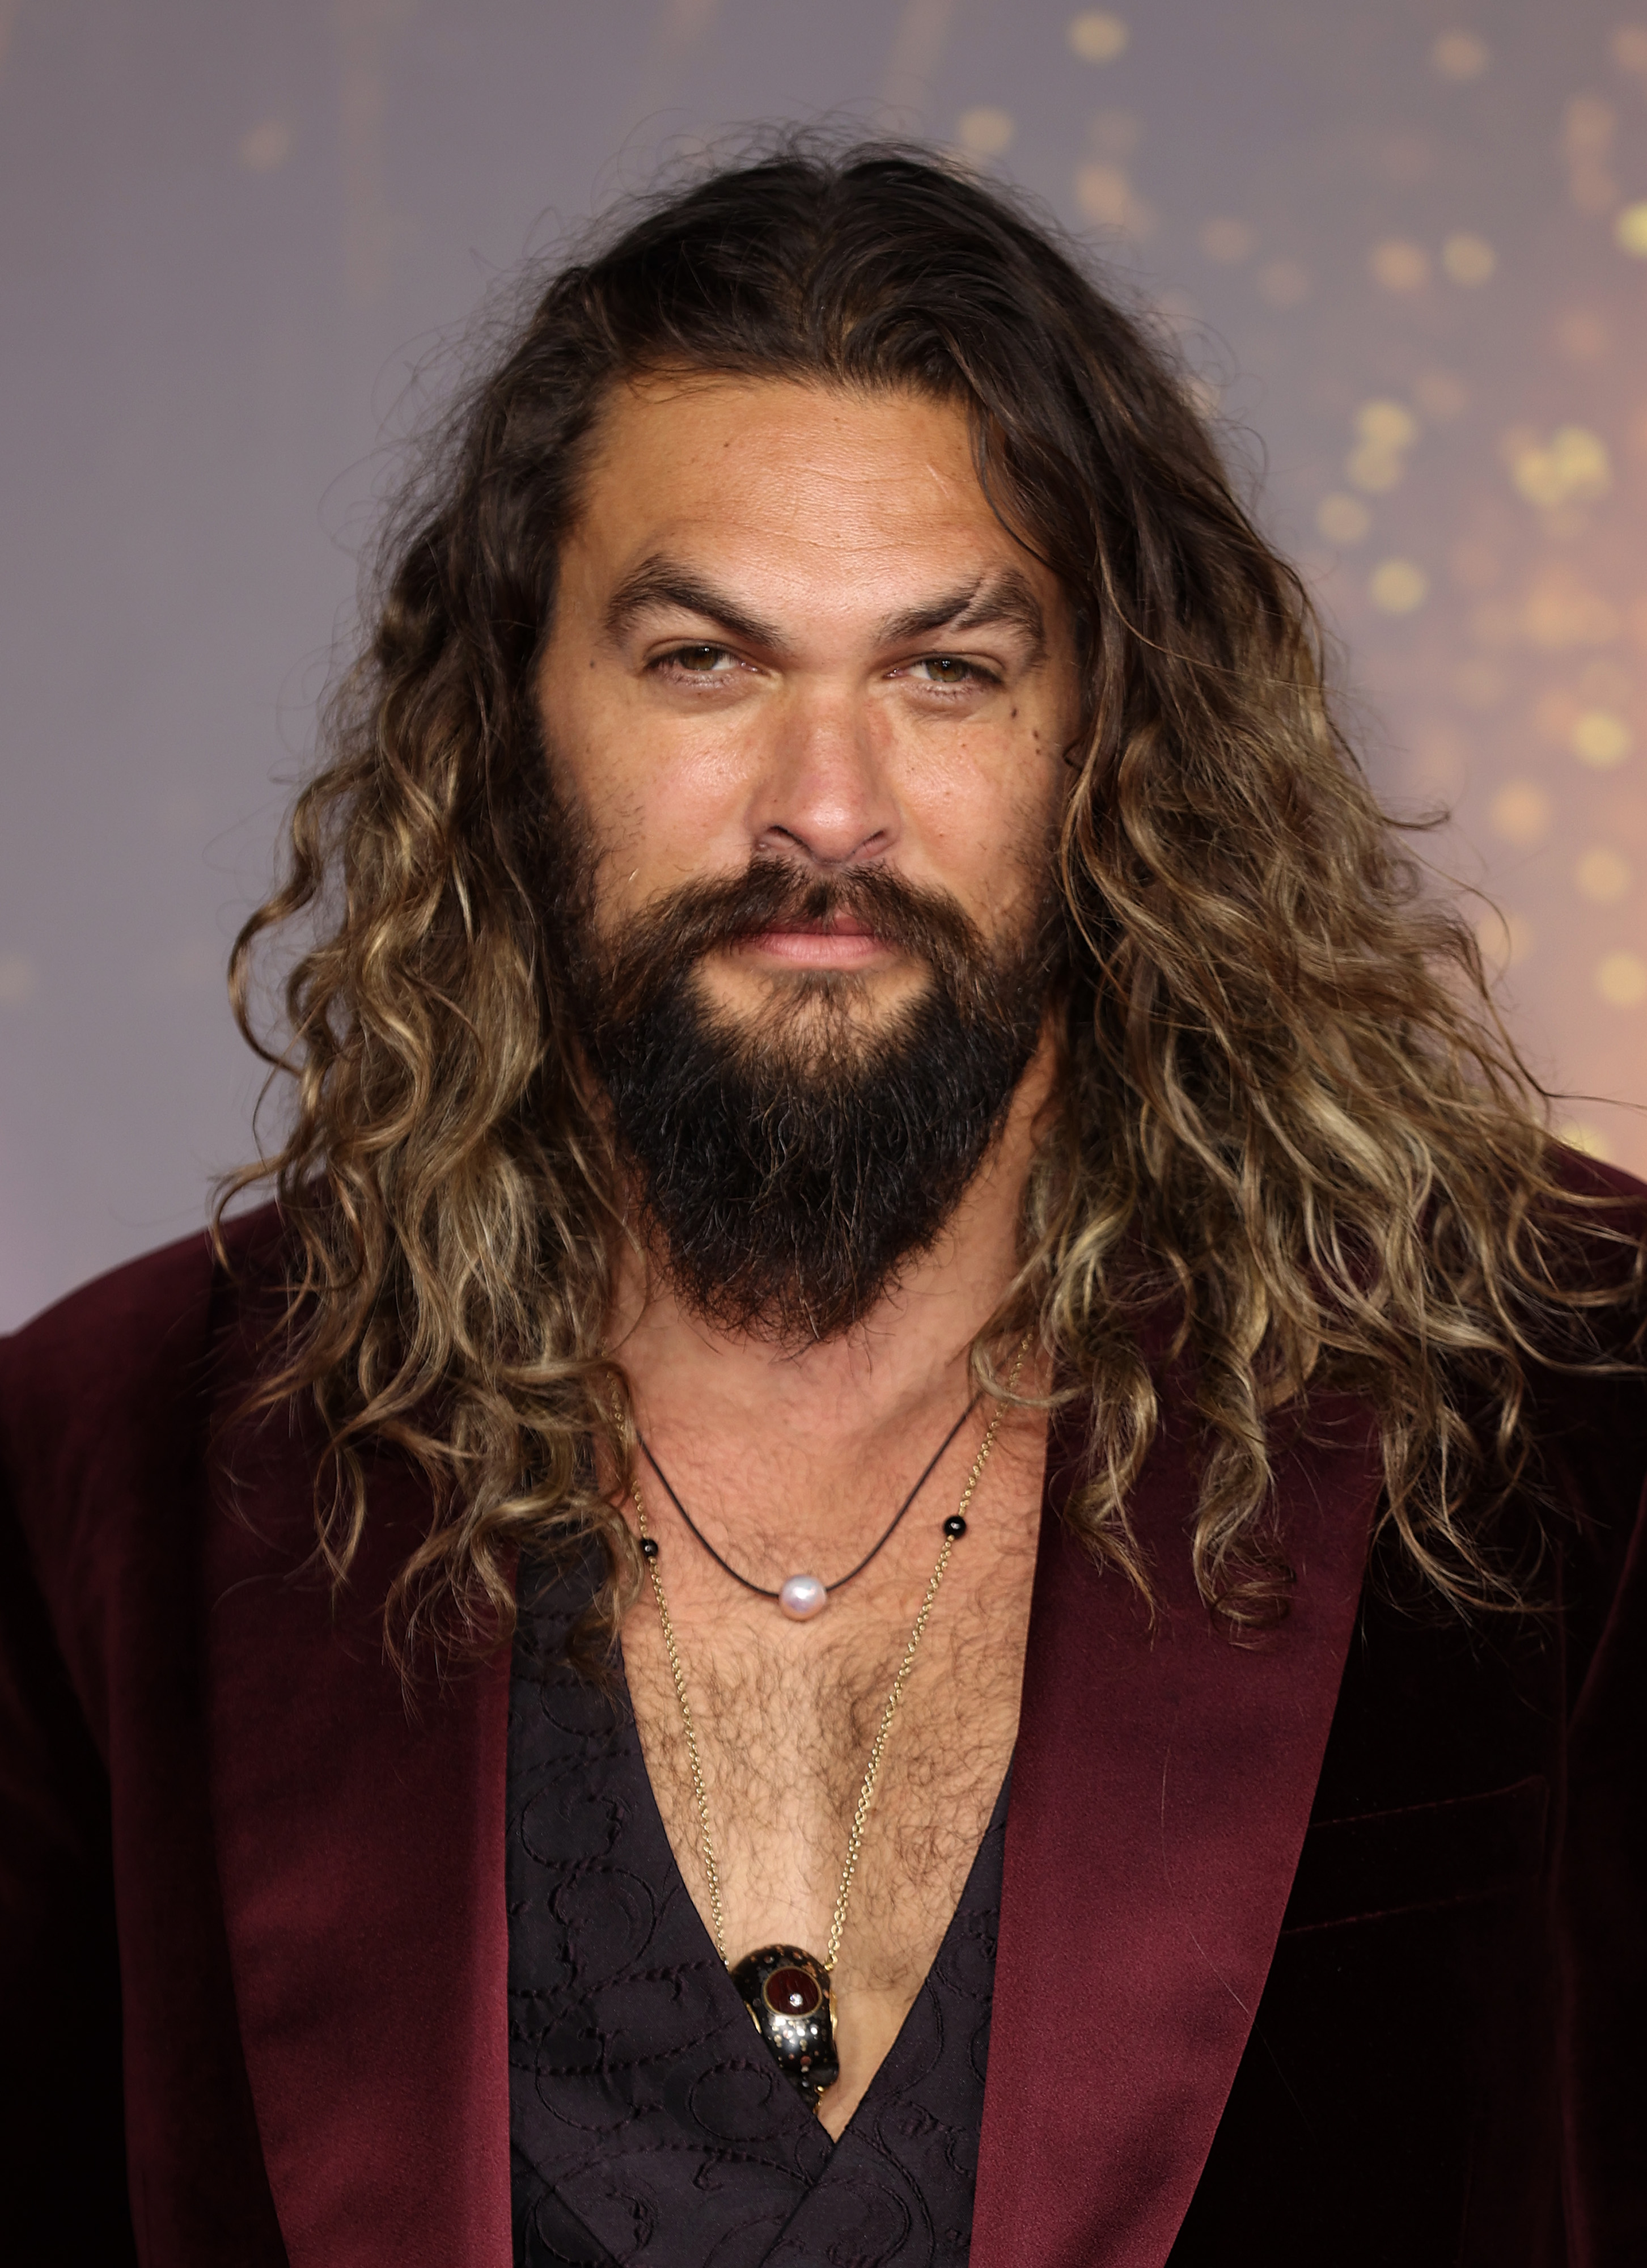 Jason Momoa bei der "Dune" UK Special Screening im Odeon Luxe Leicester Square am 18. Oktober 2021 in London, England | Quelle: Getty Images